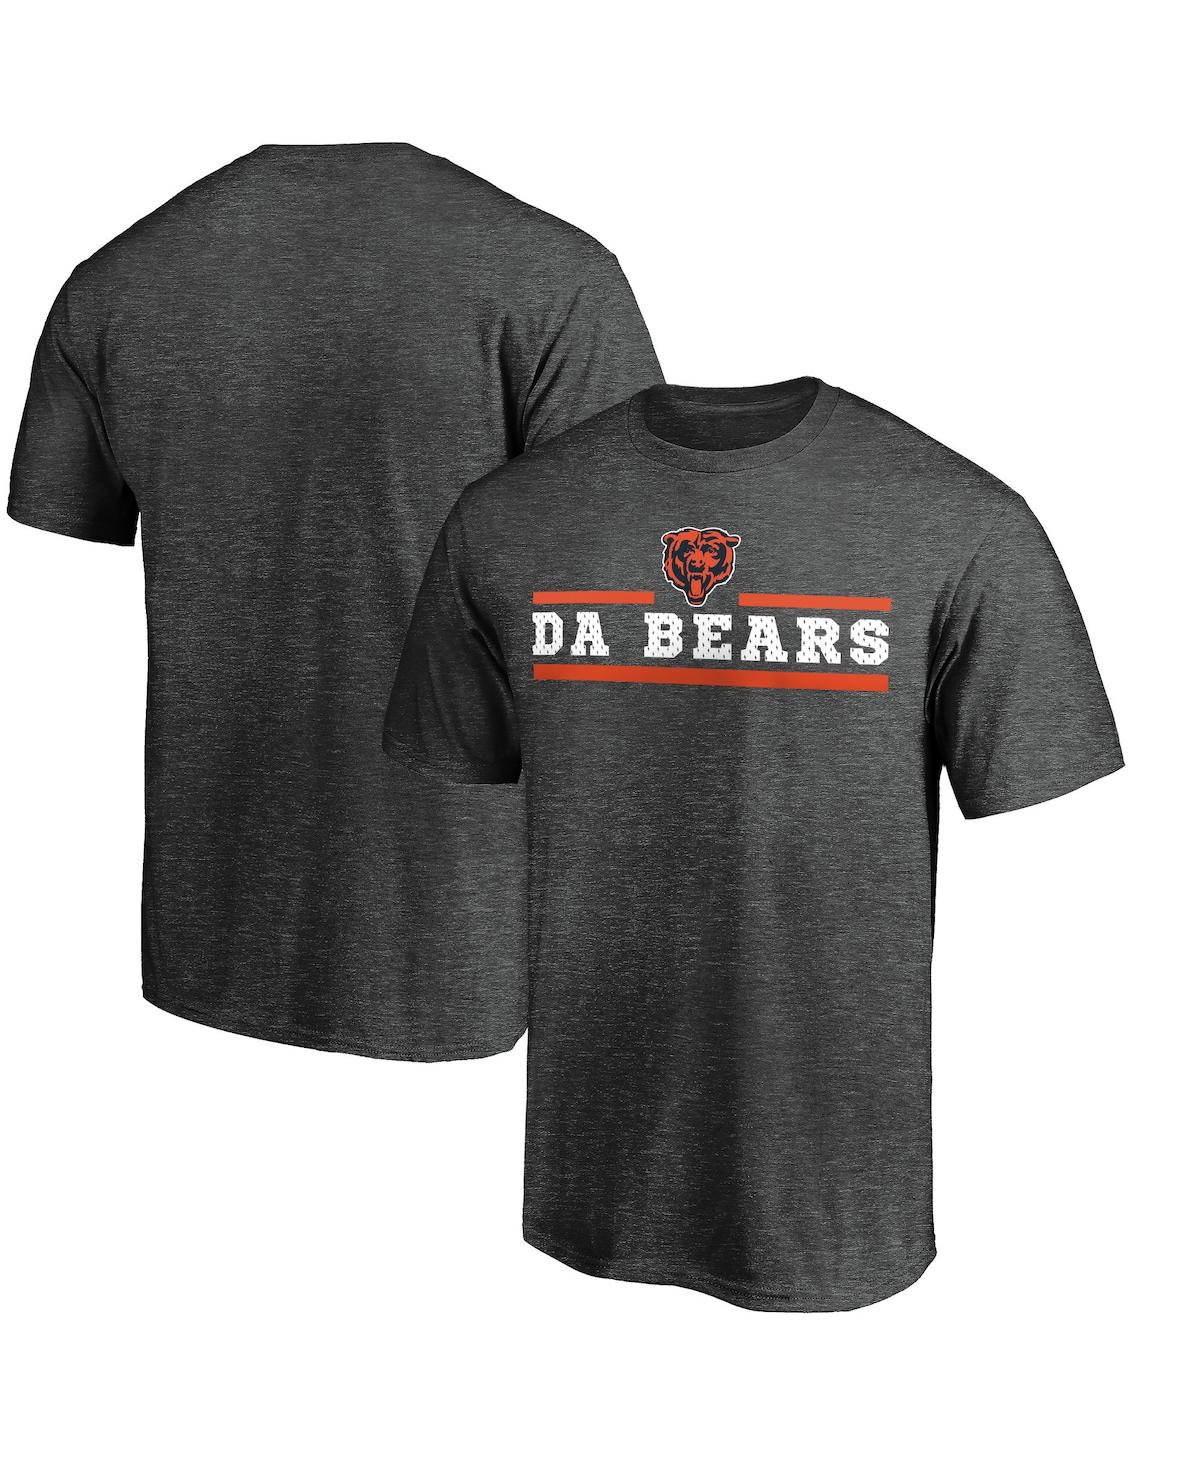 Men's Majestic Heather Charcoal Chicago Bears Showtime Let's Go T-shirt - Heathered Charcoal